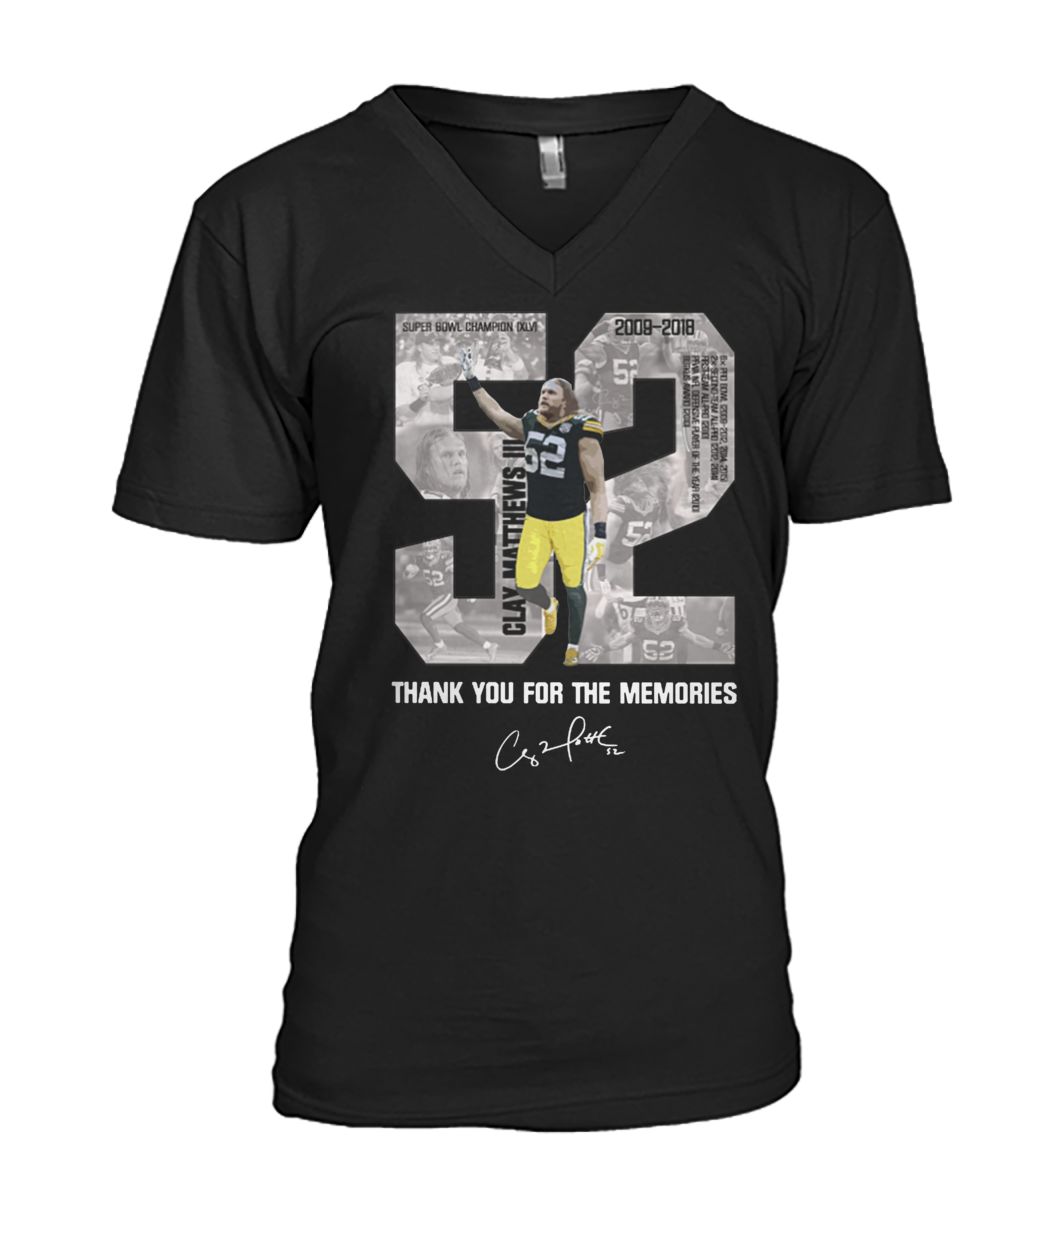 Clay matthews 52 thank you for the memories mens v-neck